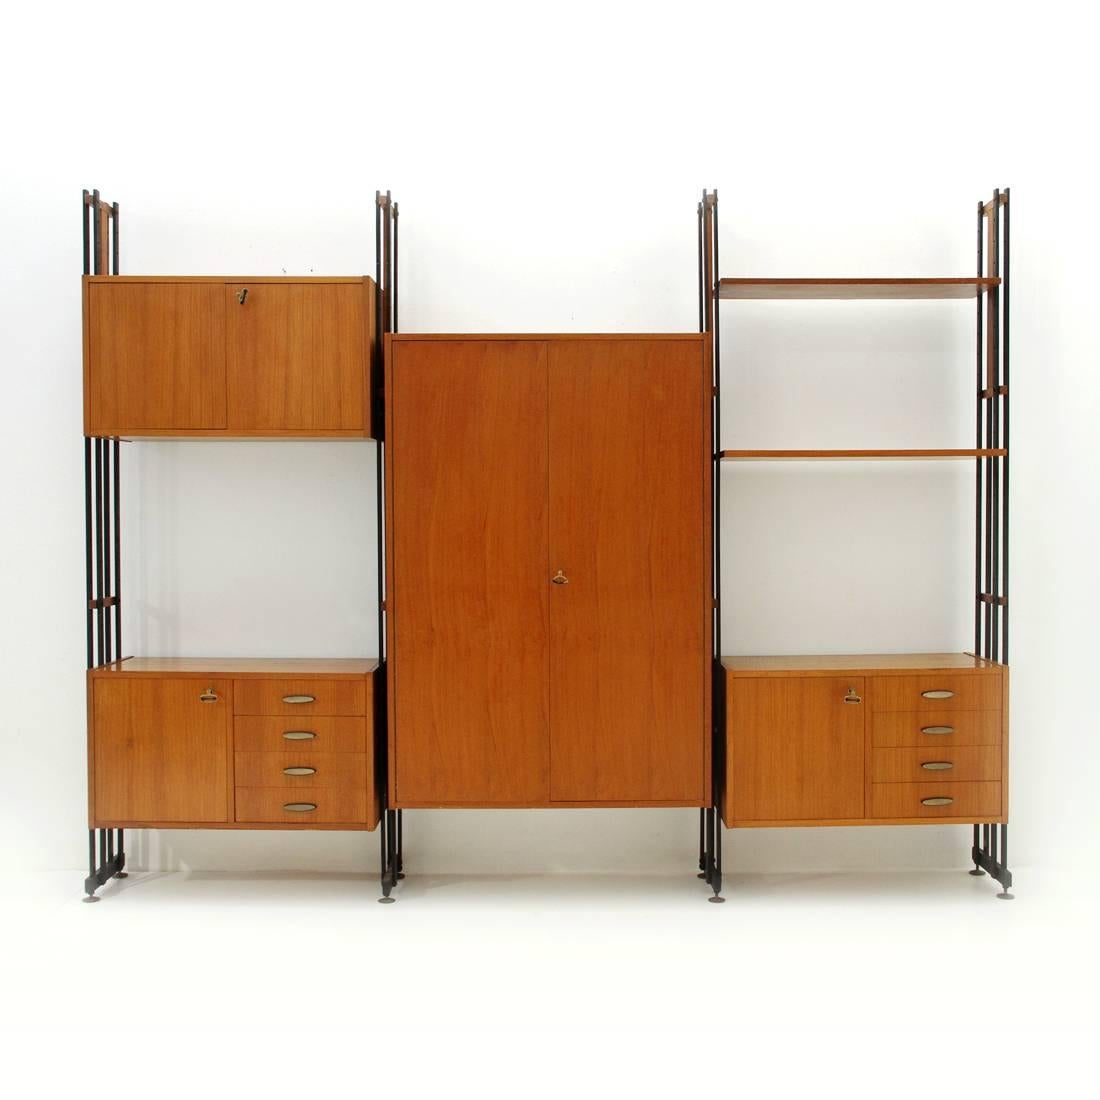 Italian library produced in the 1950s.
Uprights in black painted metal with wooden details and adjustable brass feet.
Containers and shelves in veneered teak wood.
Handles and keys, made of brass.
Structure in good condition, some signs due to